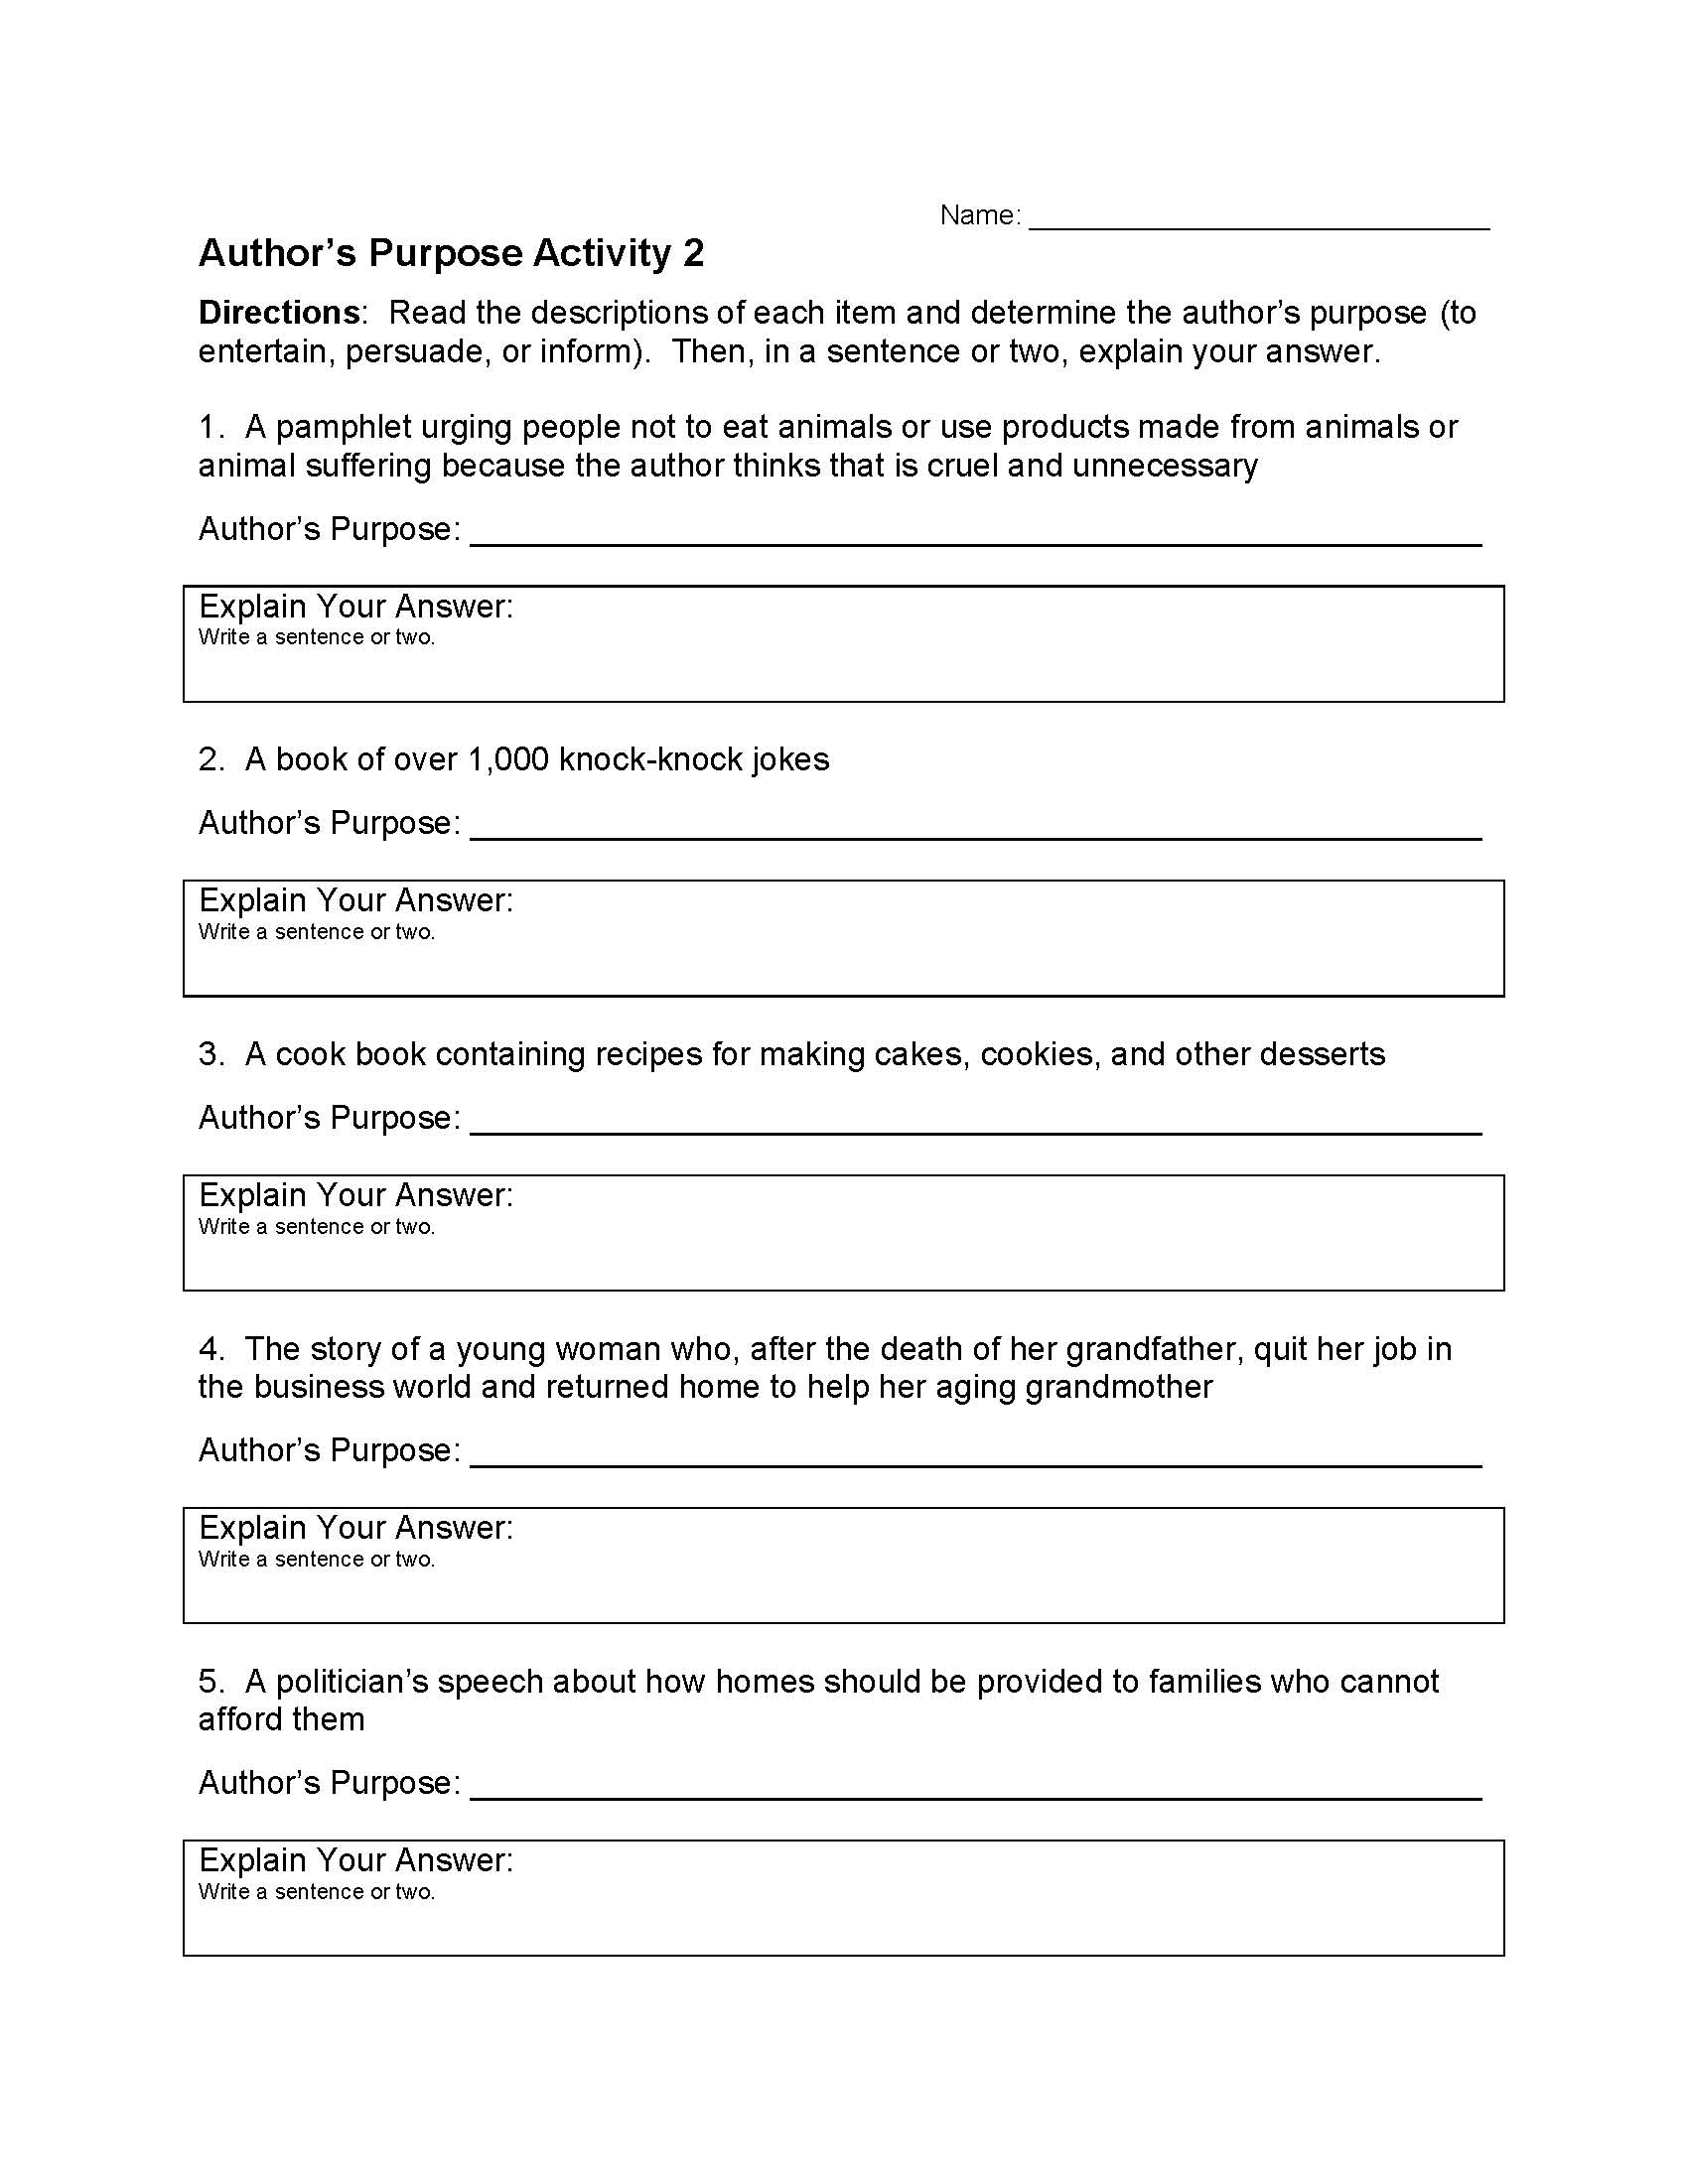 This is a preview image of Author's Purpose Worksheet 2. Click on it to enlarge it or view the source file.